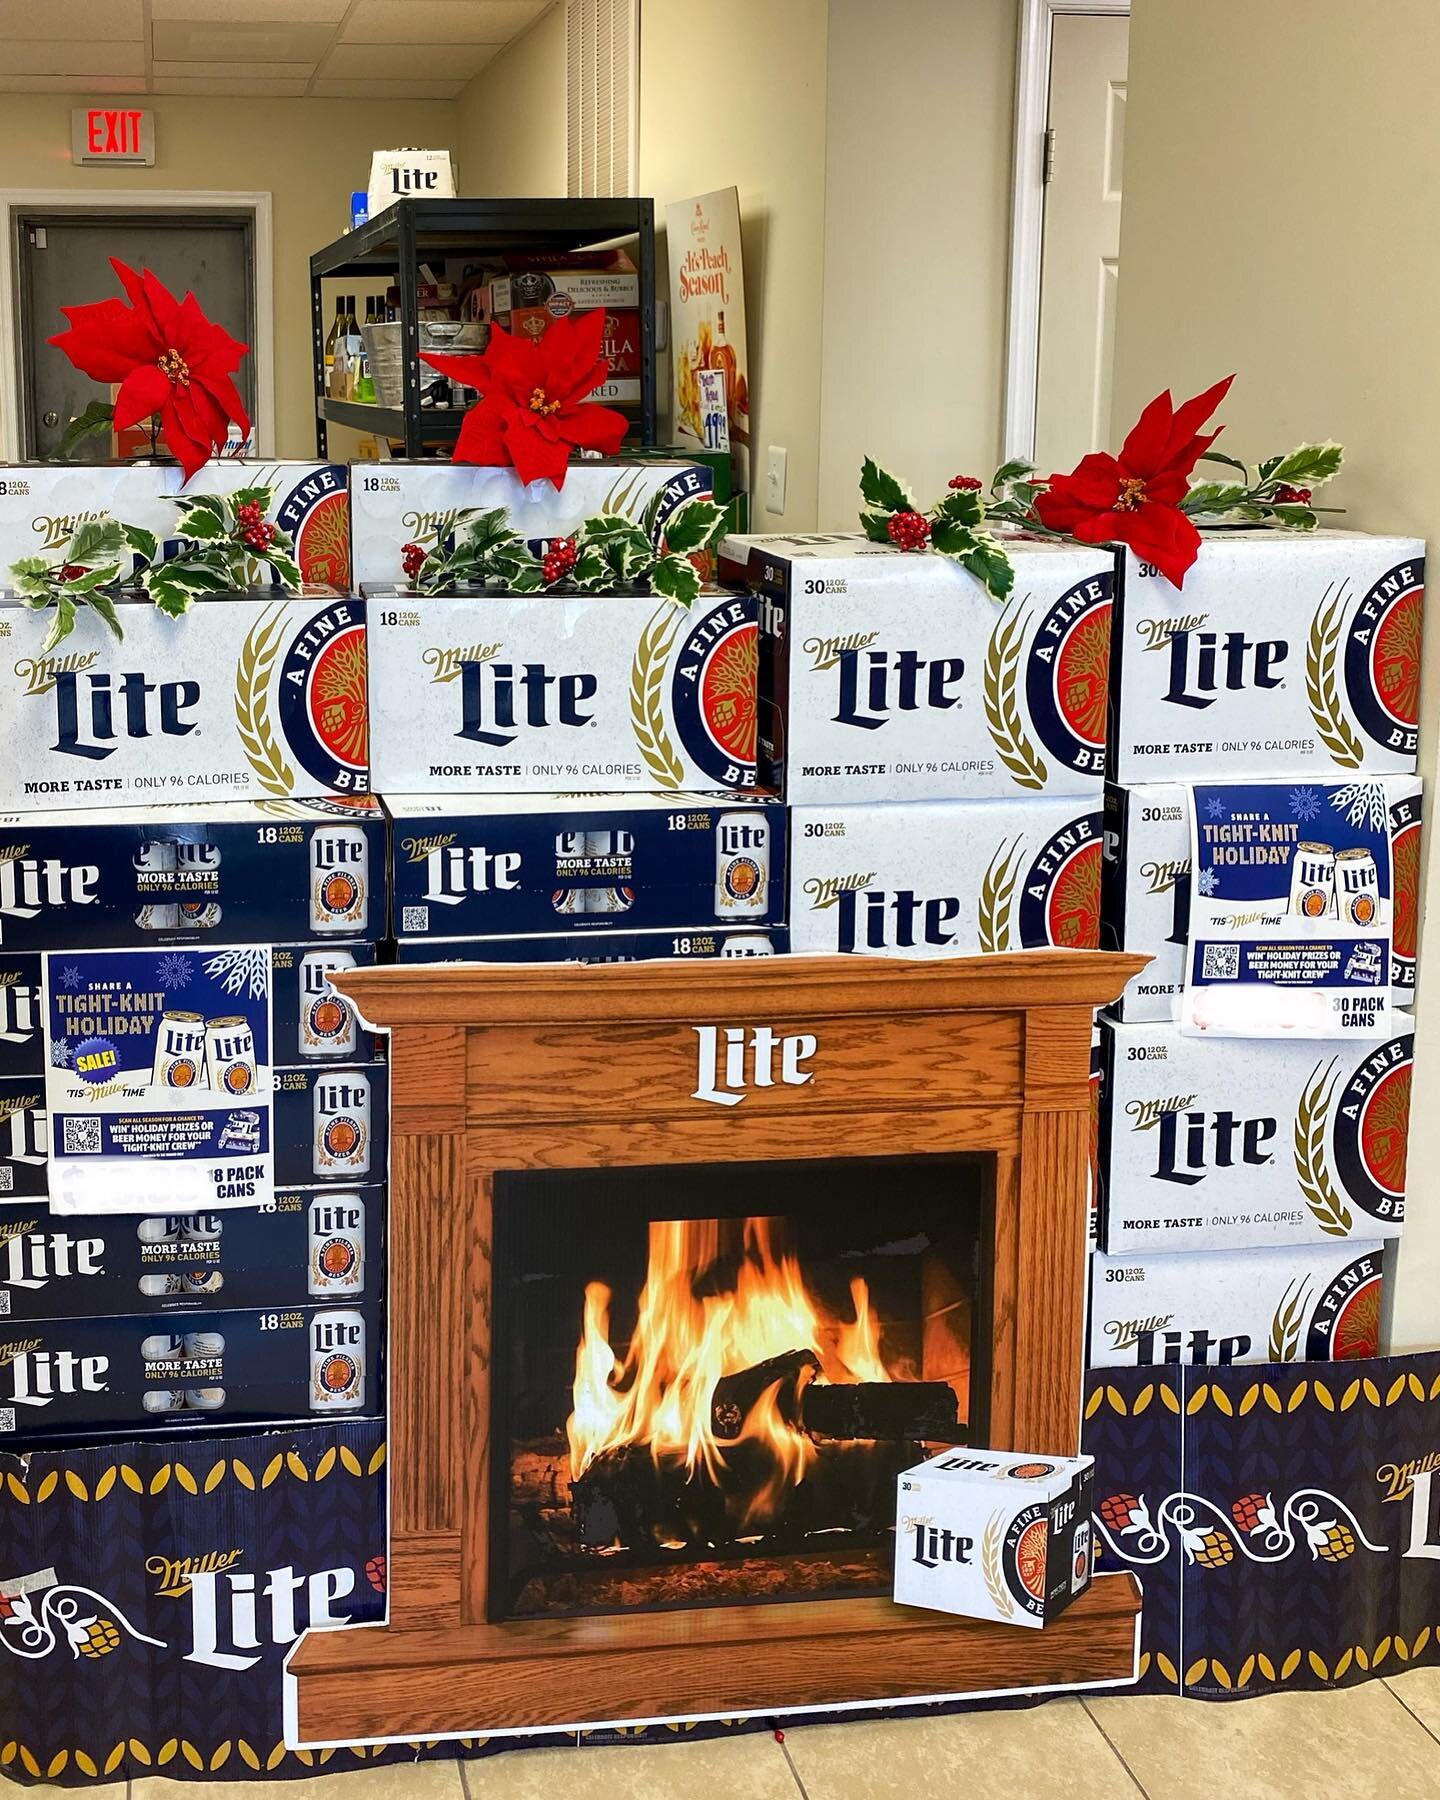 Make sure you stay warm this weekend 🍻